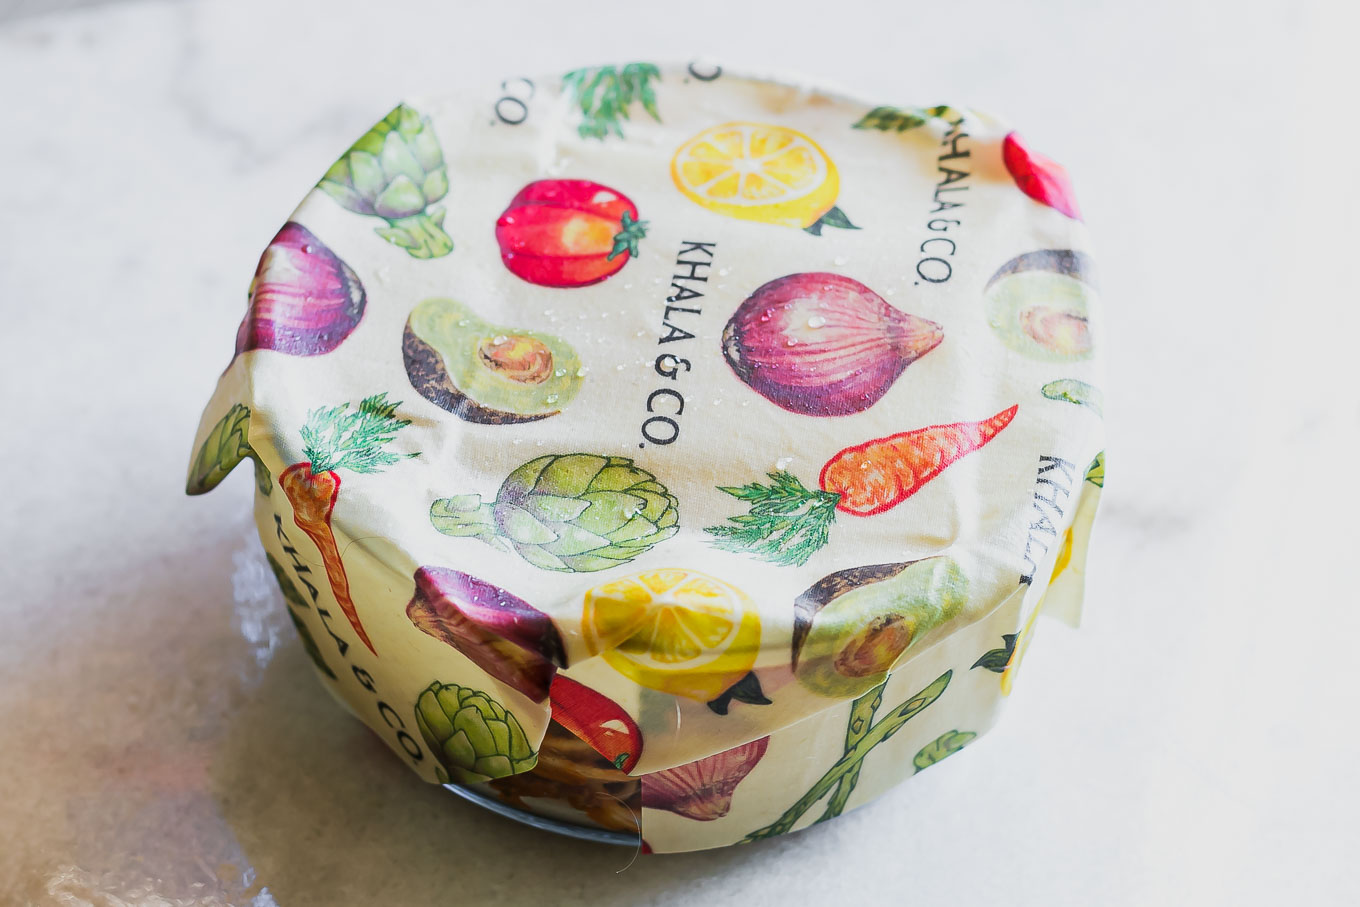 https://www.forkintheroad.co/wp-content/uploads/2022/02/beeswax-wrap-eco-friendly-113.jpg